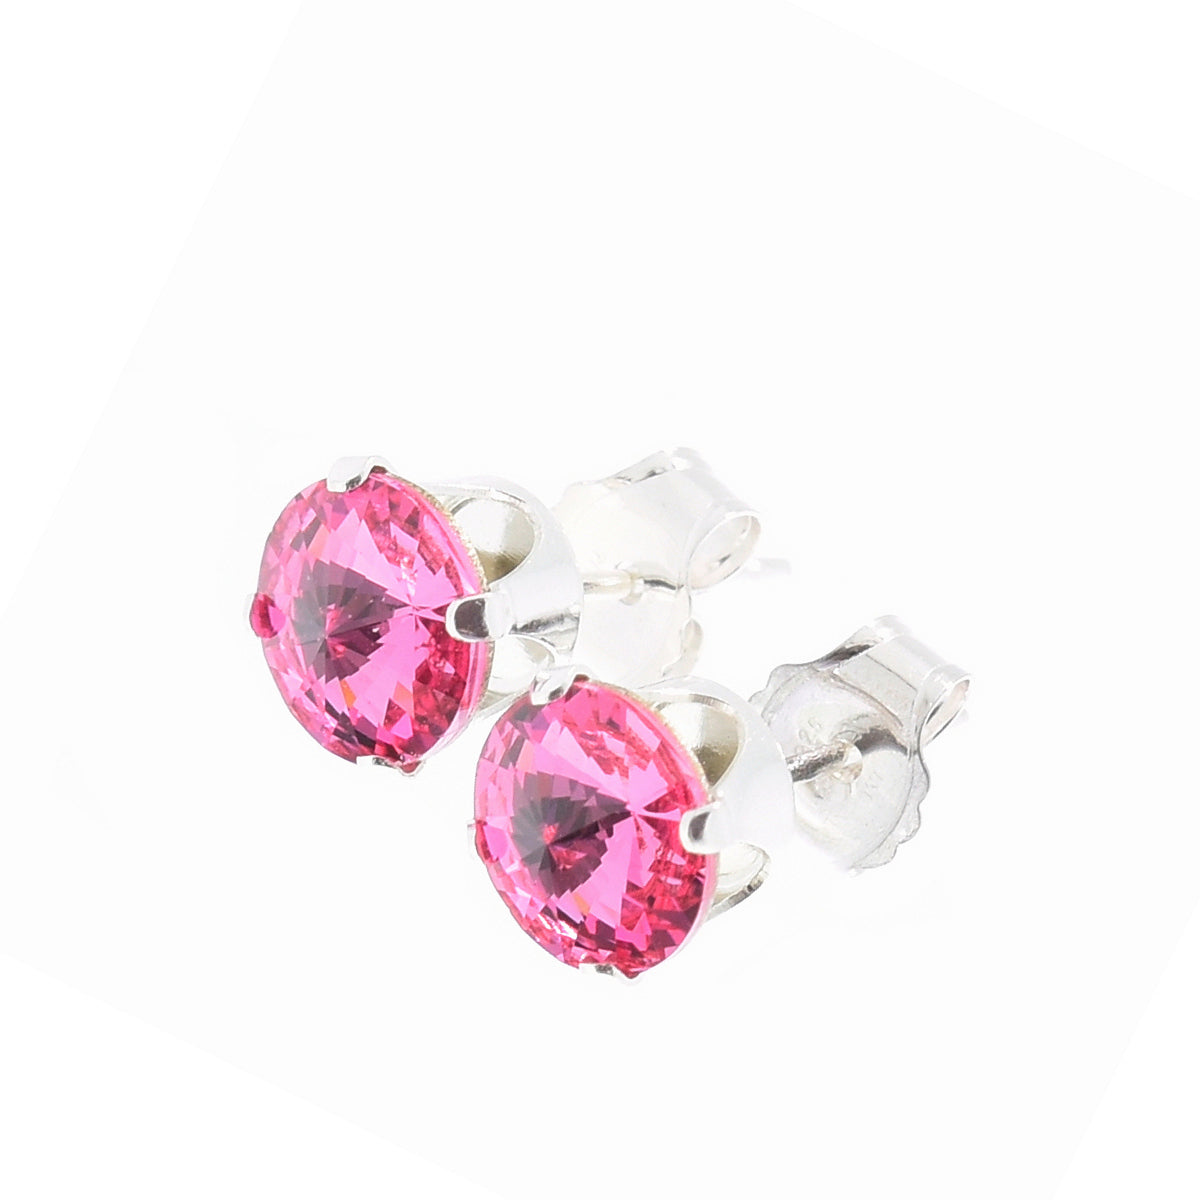 pewterhooter® Women's Classic Collection 925 Sterling silver earrings with brilliant Light Rose crystals, packaged in a gift box for any occasion.